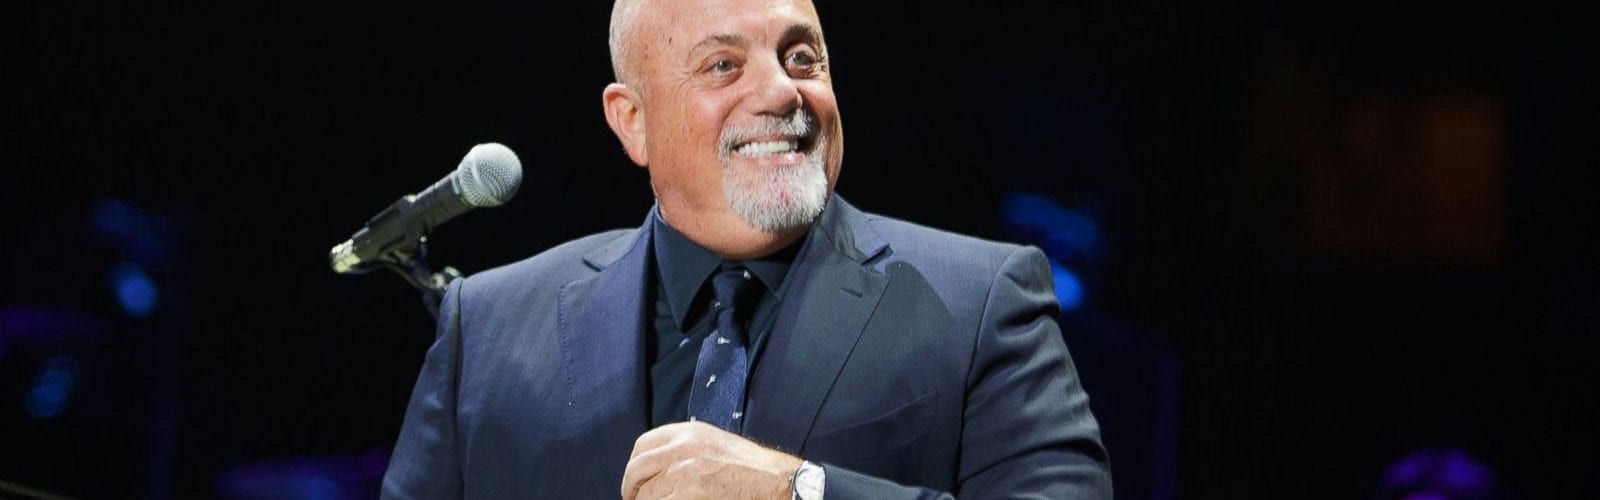 Billy Joel on stage in front of a microphone